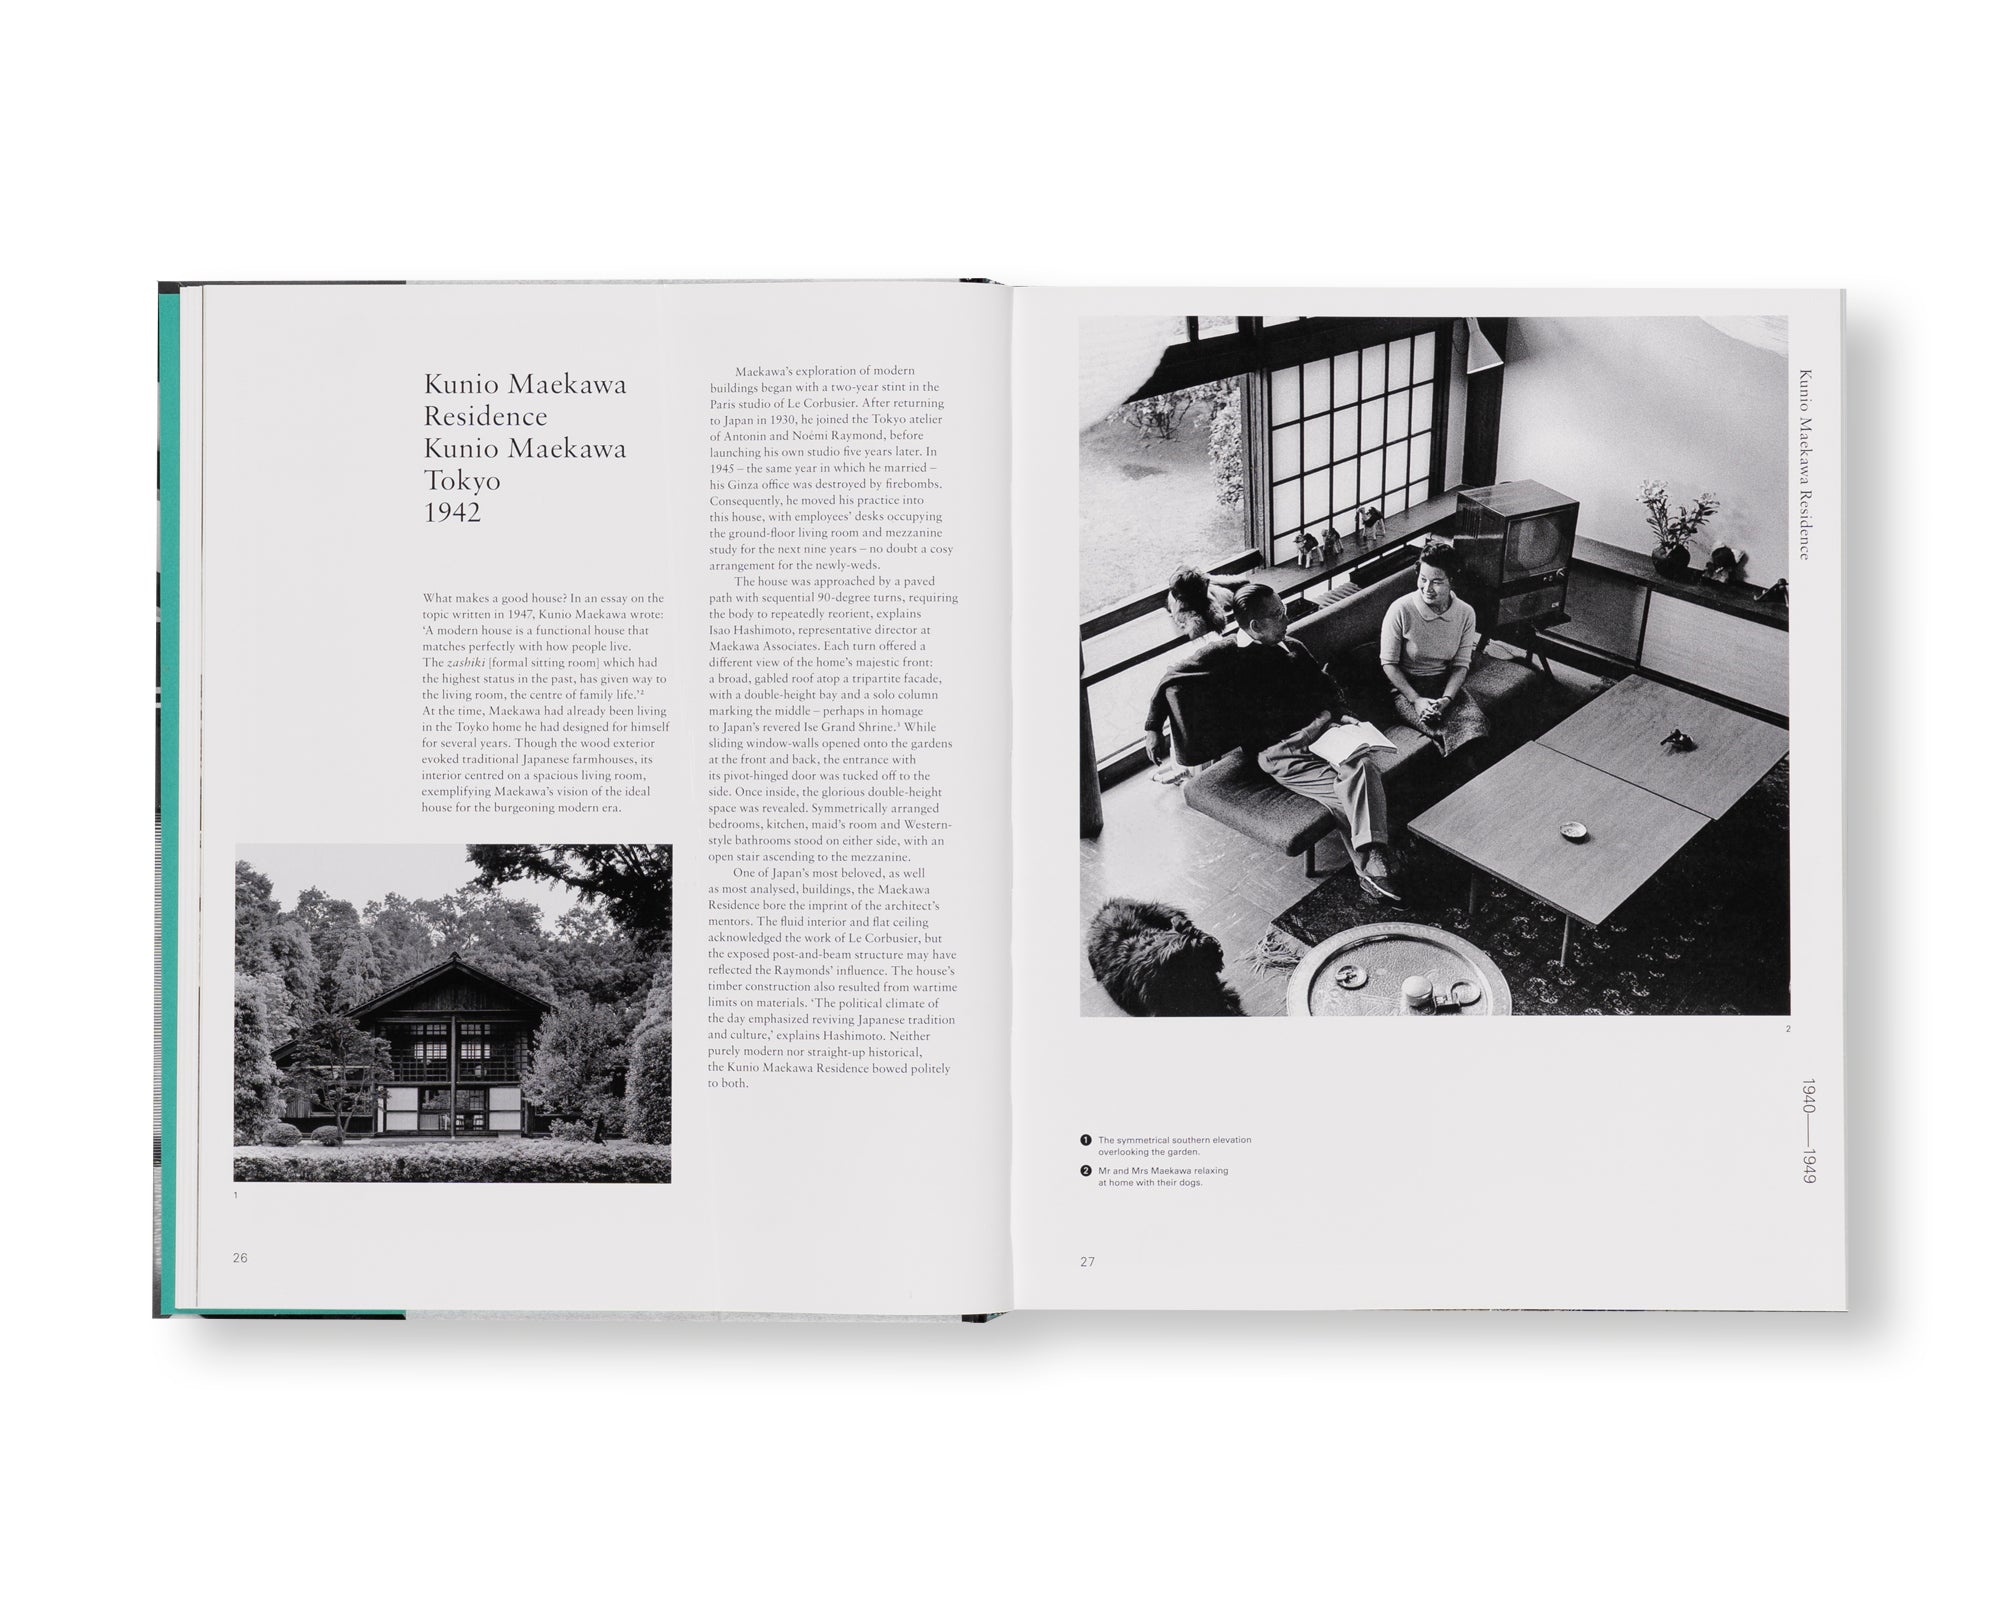 THE JAPANESE HOUSE SINCE 1945 by Naomi Pollock